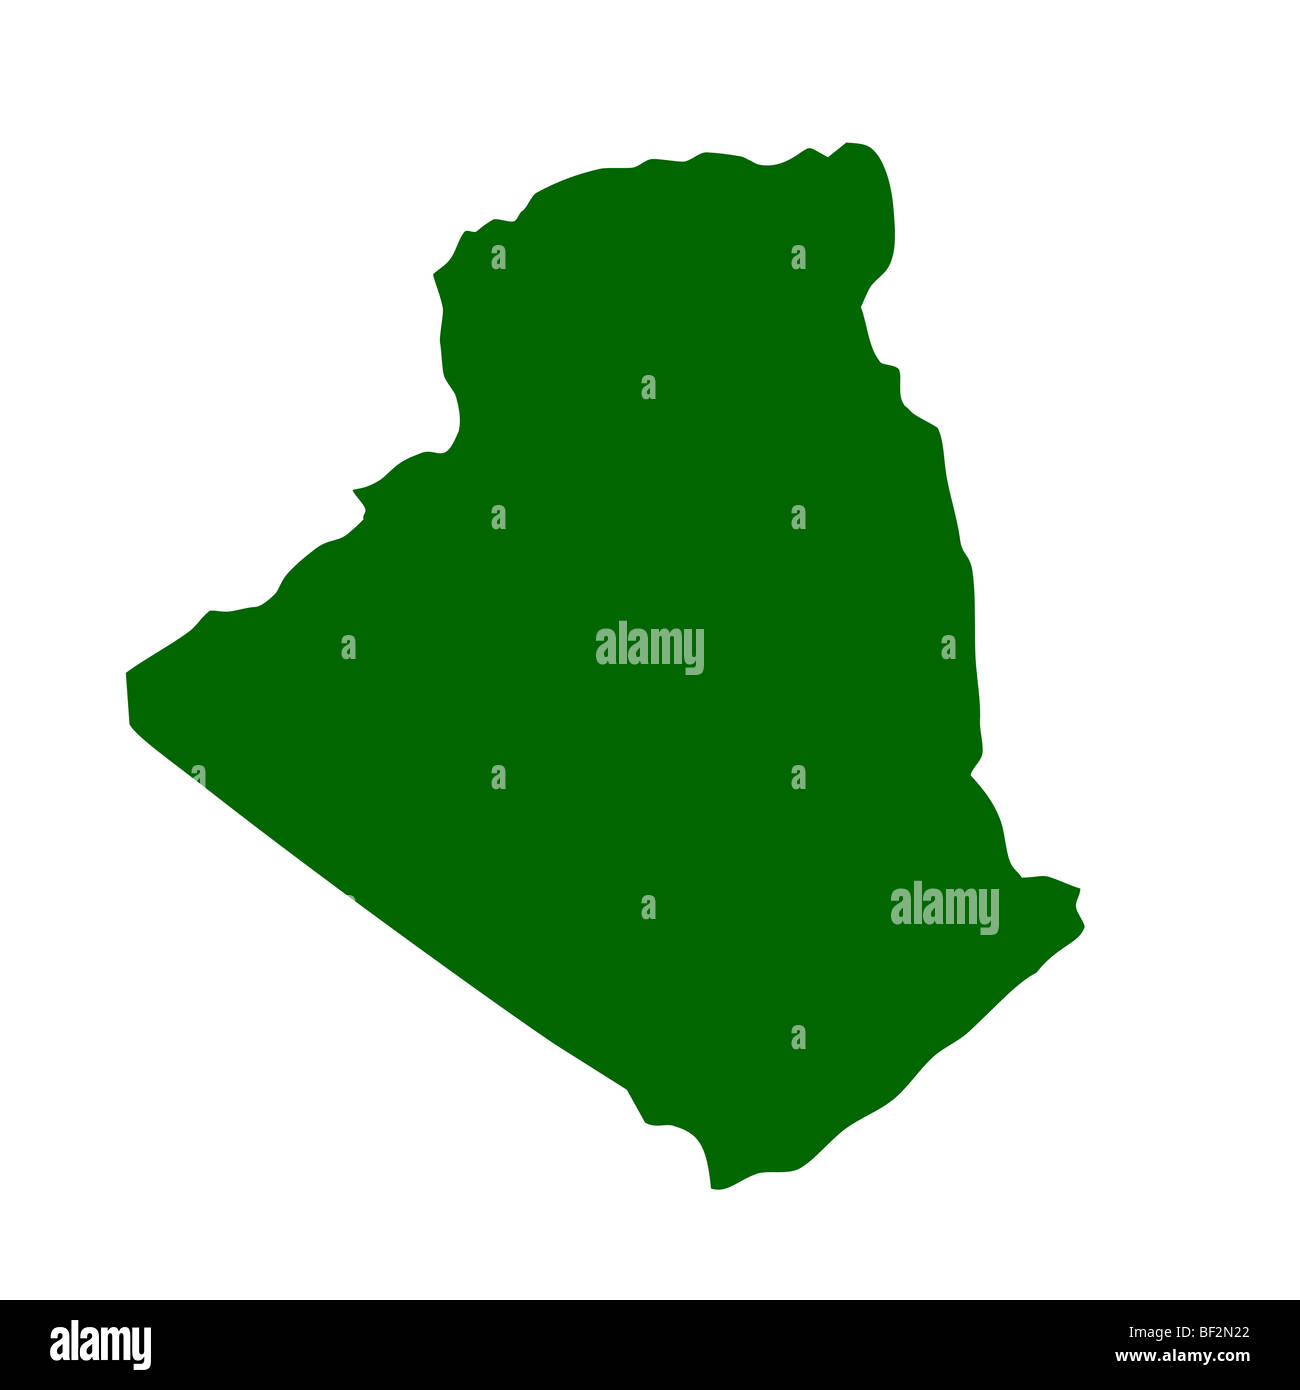 Outline map of Algeria isolated on white background with clipping path. Stock Photo